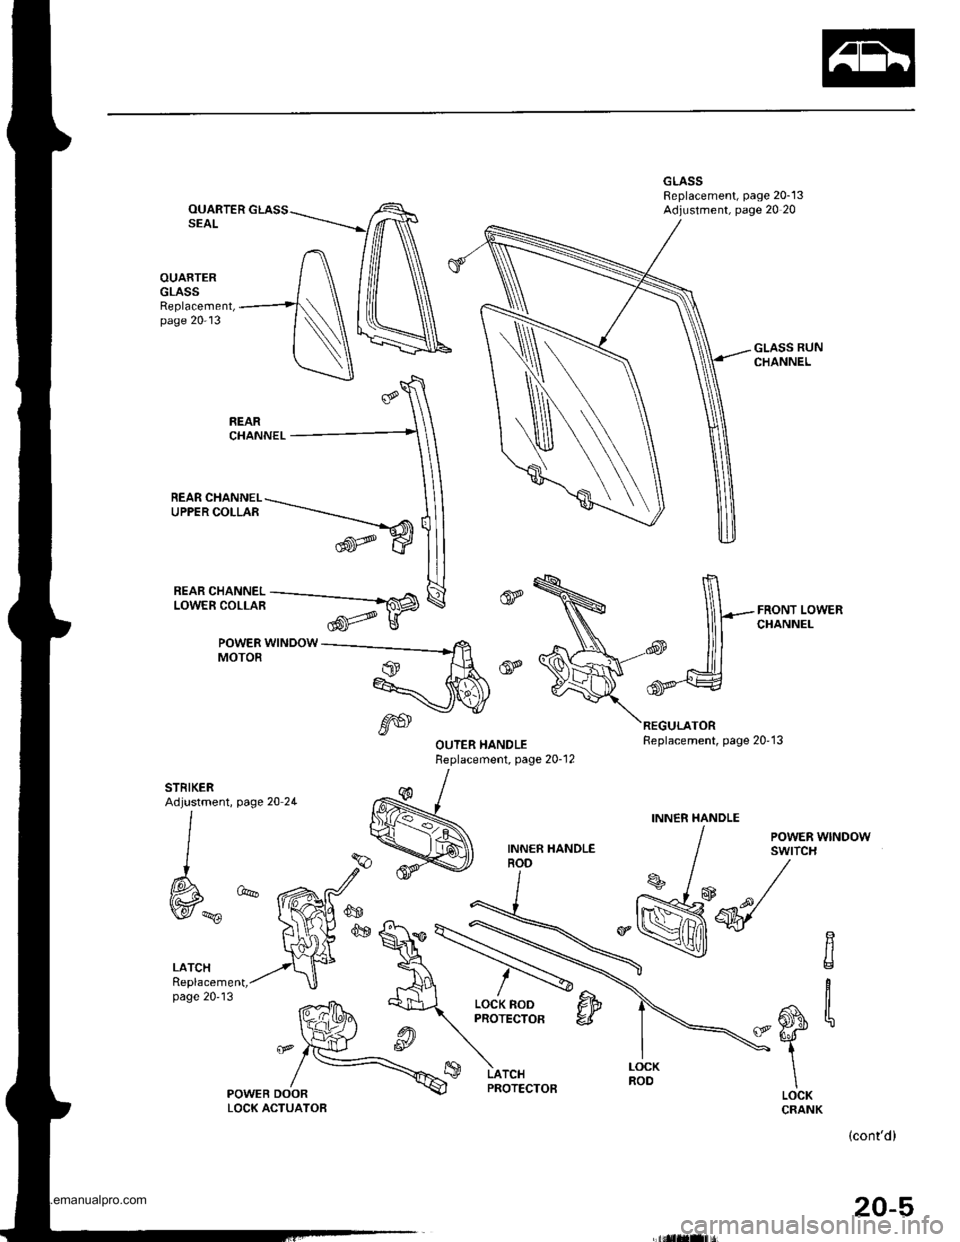 HONDA CR-V 1997 RD1-RD3 / 1.G User Guide 
OUARTERSEAL
OUARTERGLASSReplacement,page 20-13
-flHiili^i--_Fffi
POWER WINDOWMOTOR
REAR CHANNEL-\UPPERCOLLAR -.-----_----_-""
trw
page 20 2L
LATCHReplacement,page 2013
POWEB DOORLOCK ACTUATOB
,6S
R